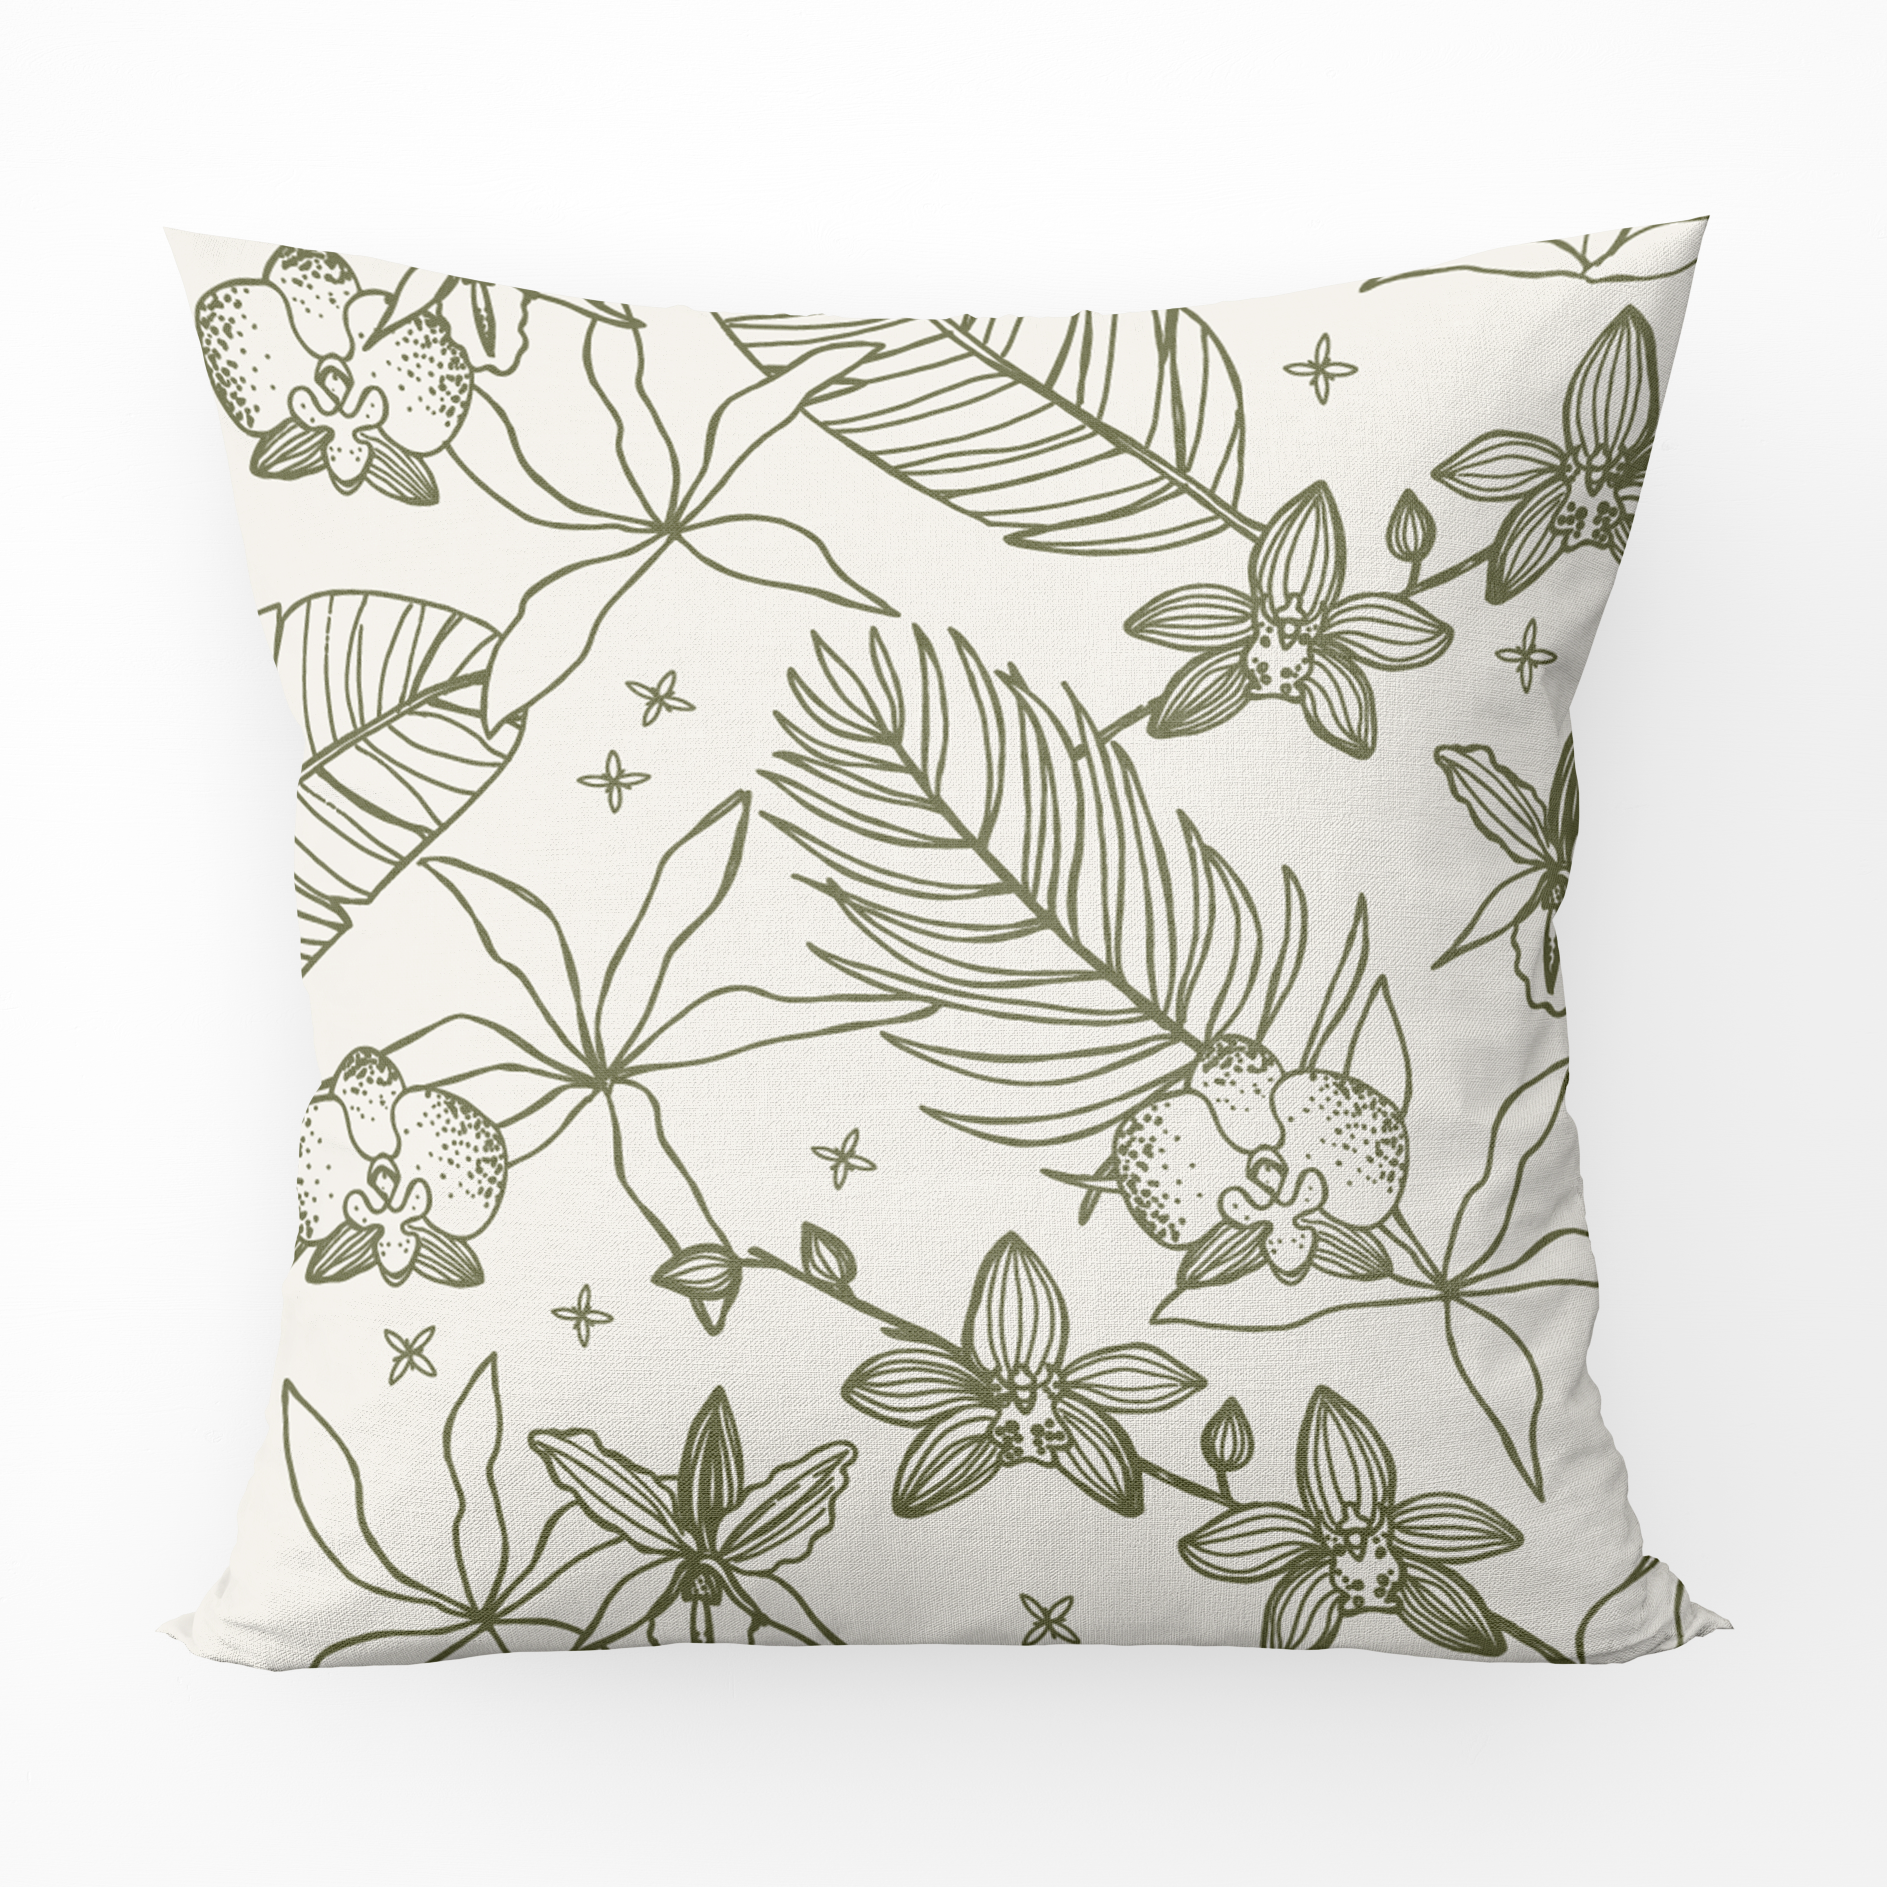 22X22" Pillow Cover in Paradise Party Olive Green